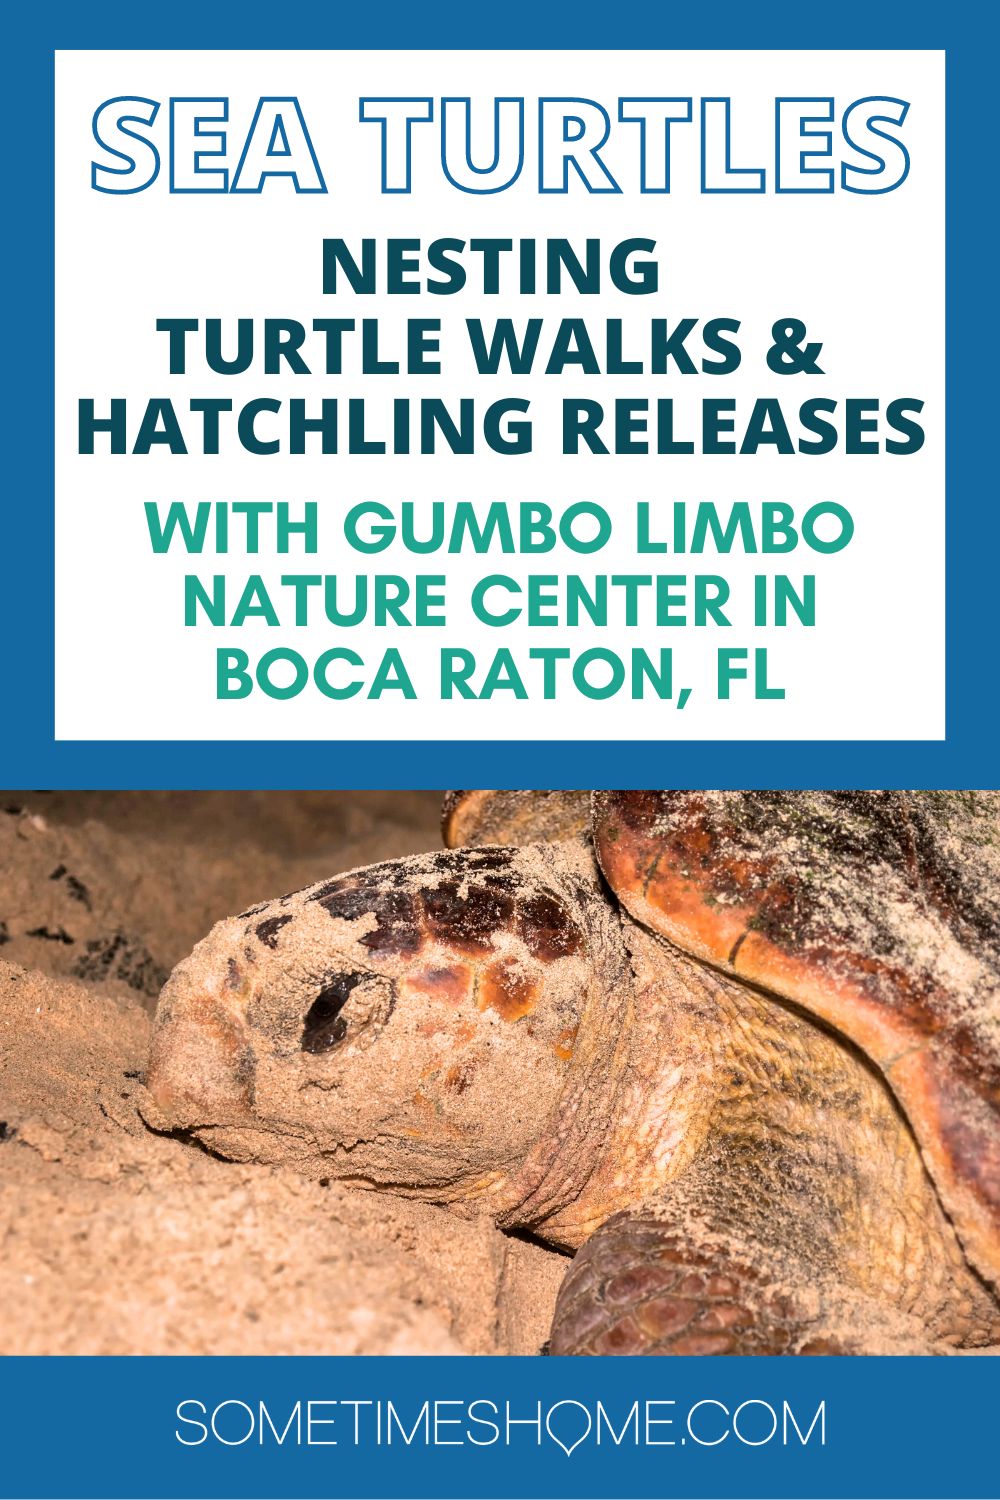 Nesting Sea Turtle Walk with Gumbo Limbo Nature Center in Boca Raton, FL with a close-up picture of a Loggerhead turtle with sand on it.